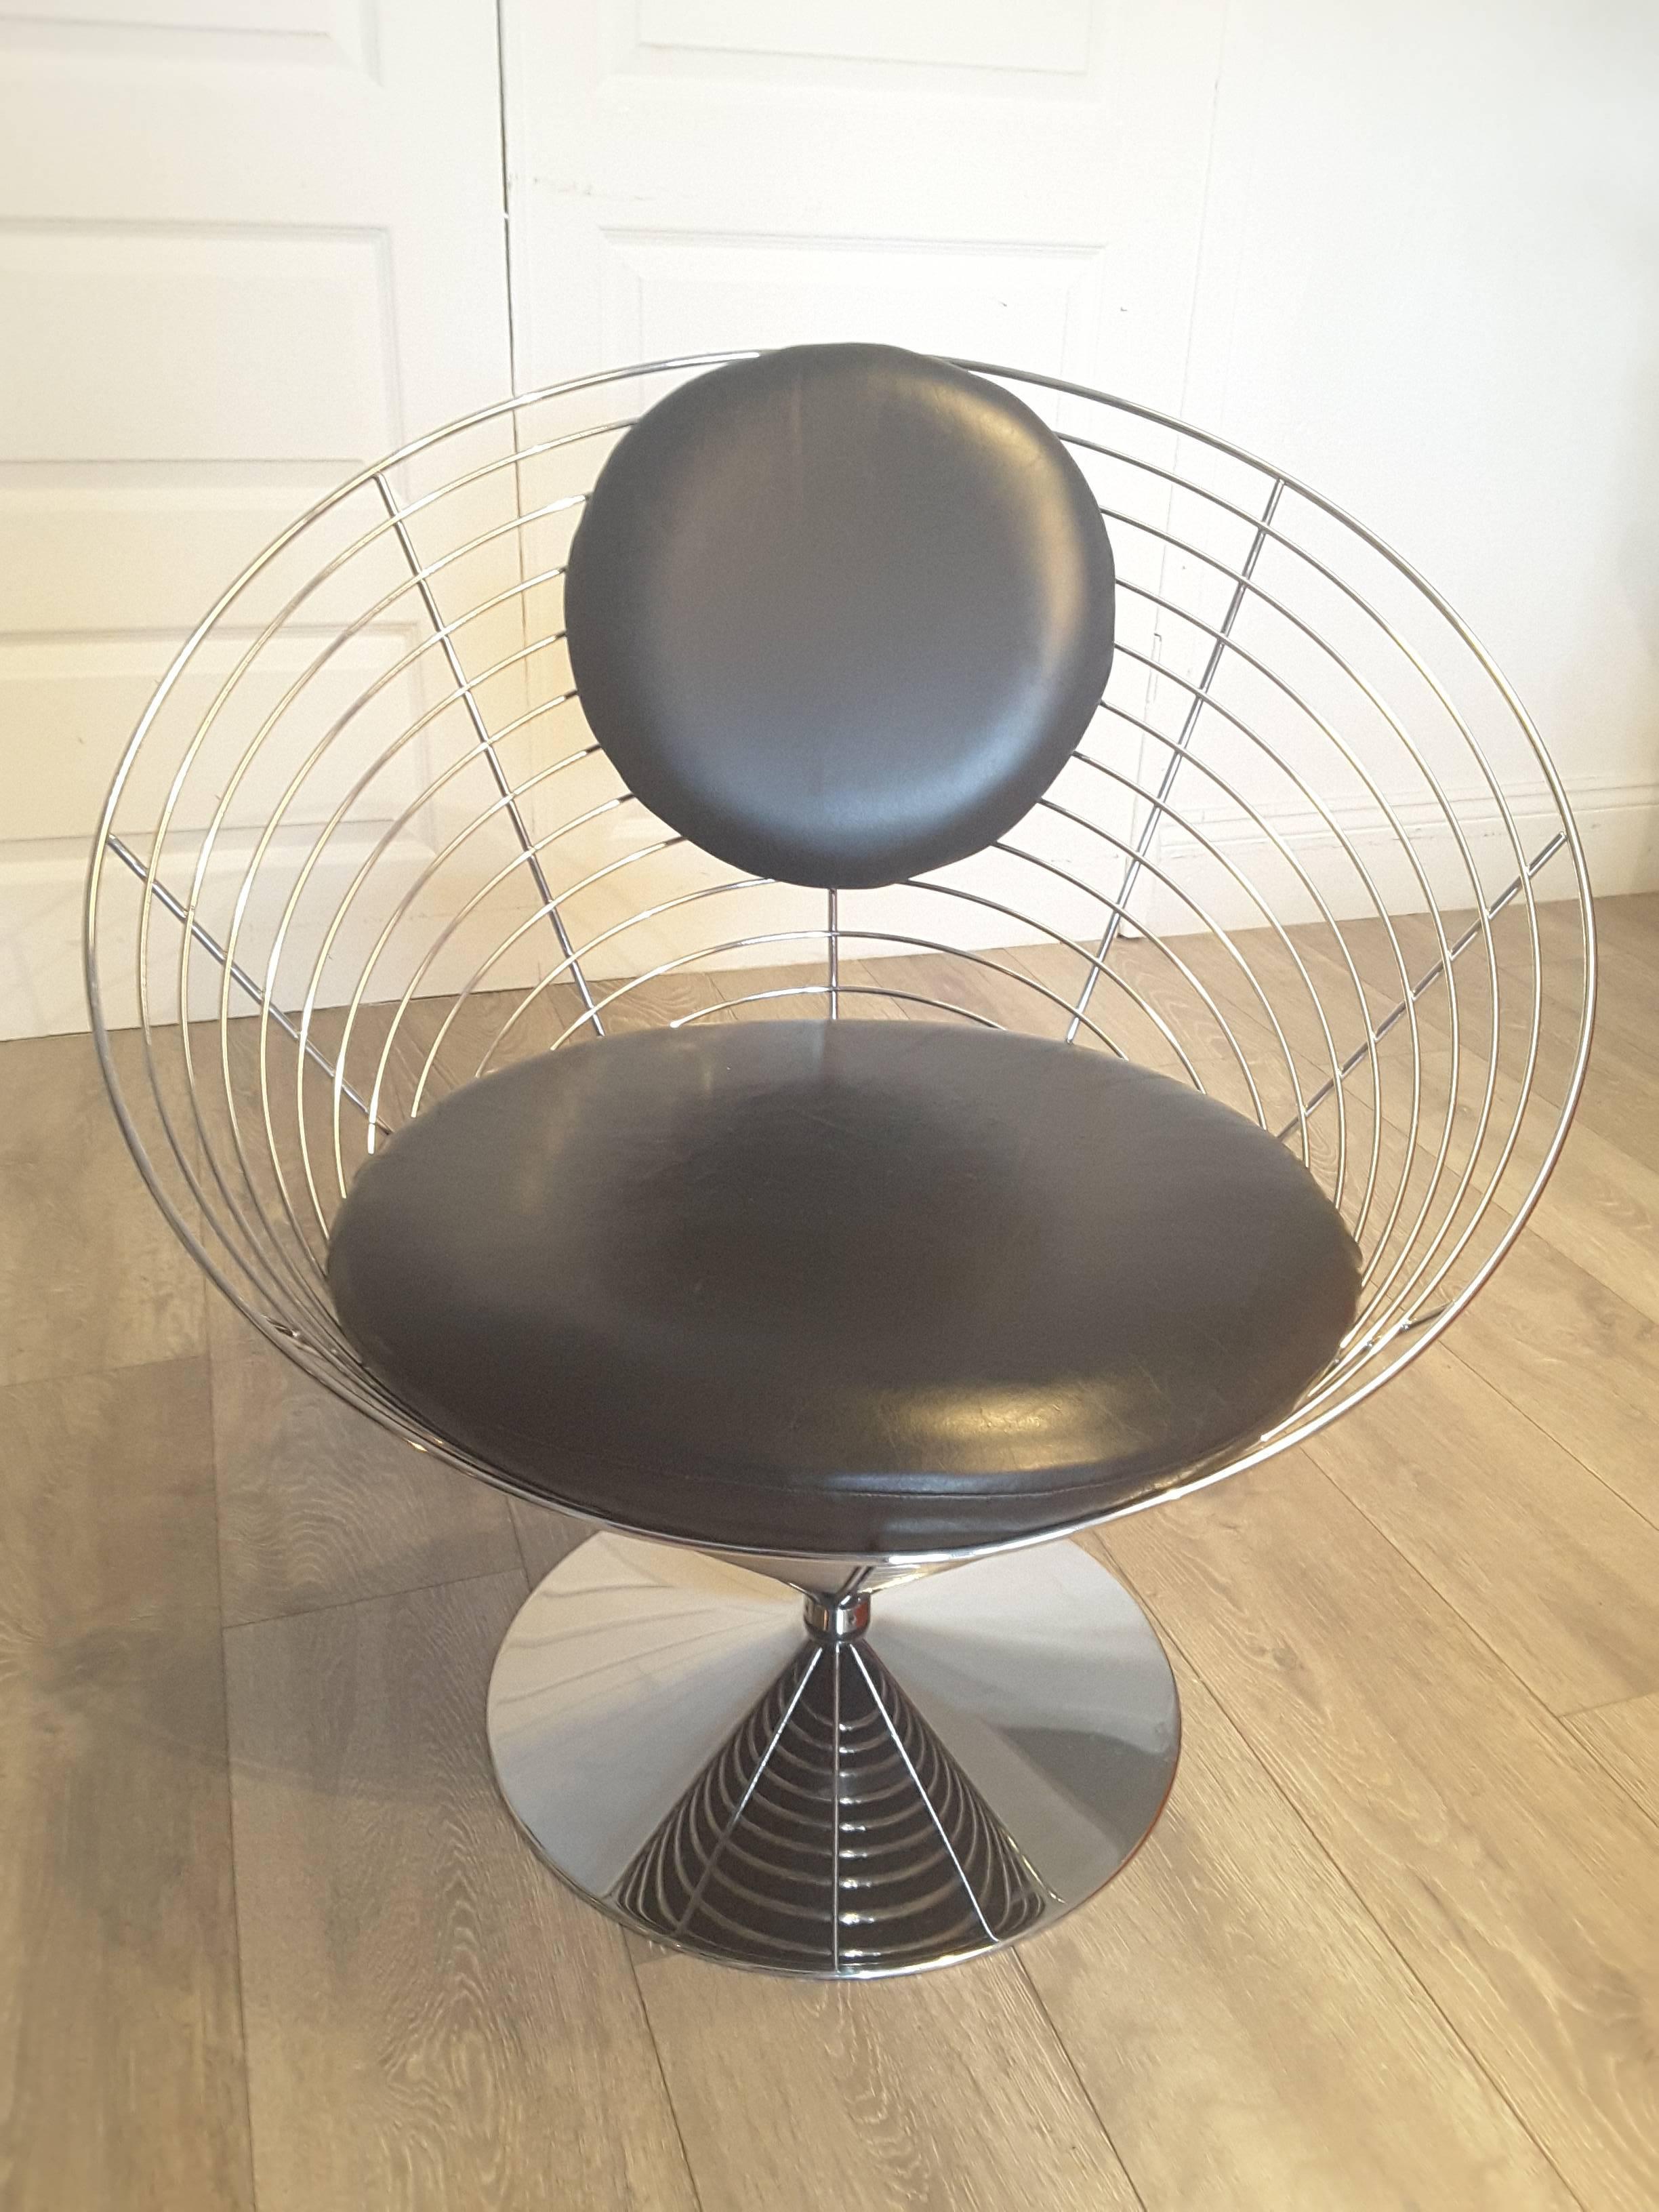 A wire cone chair designed by Verner Panton for Fritz Hansen. Constructed from one coherant spiral welded into eight struts. On swivel base with black leather upholstery.